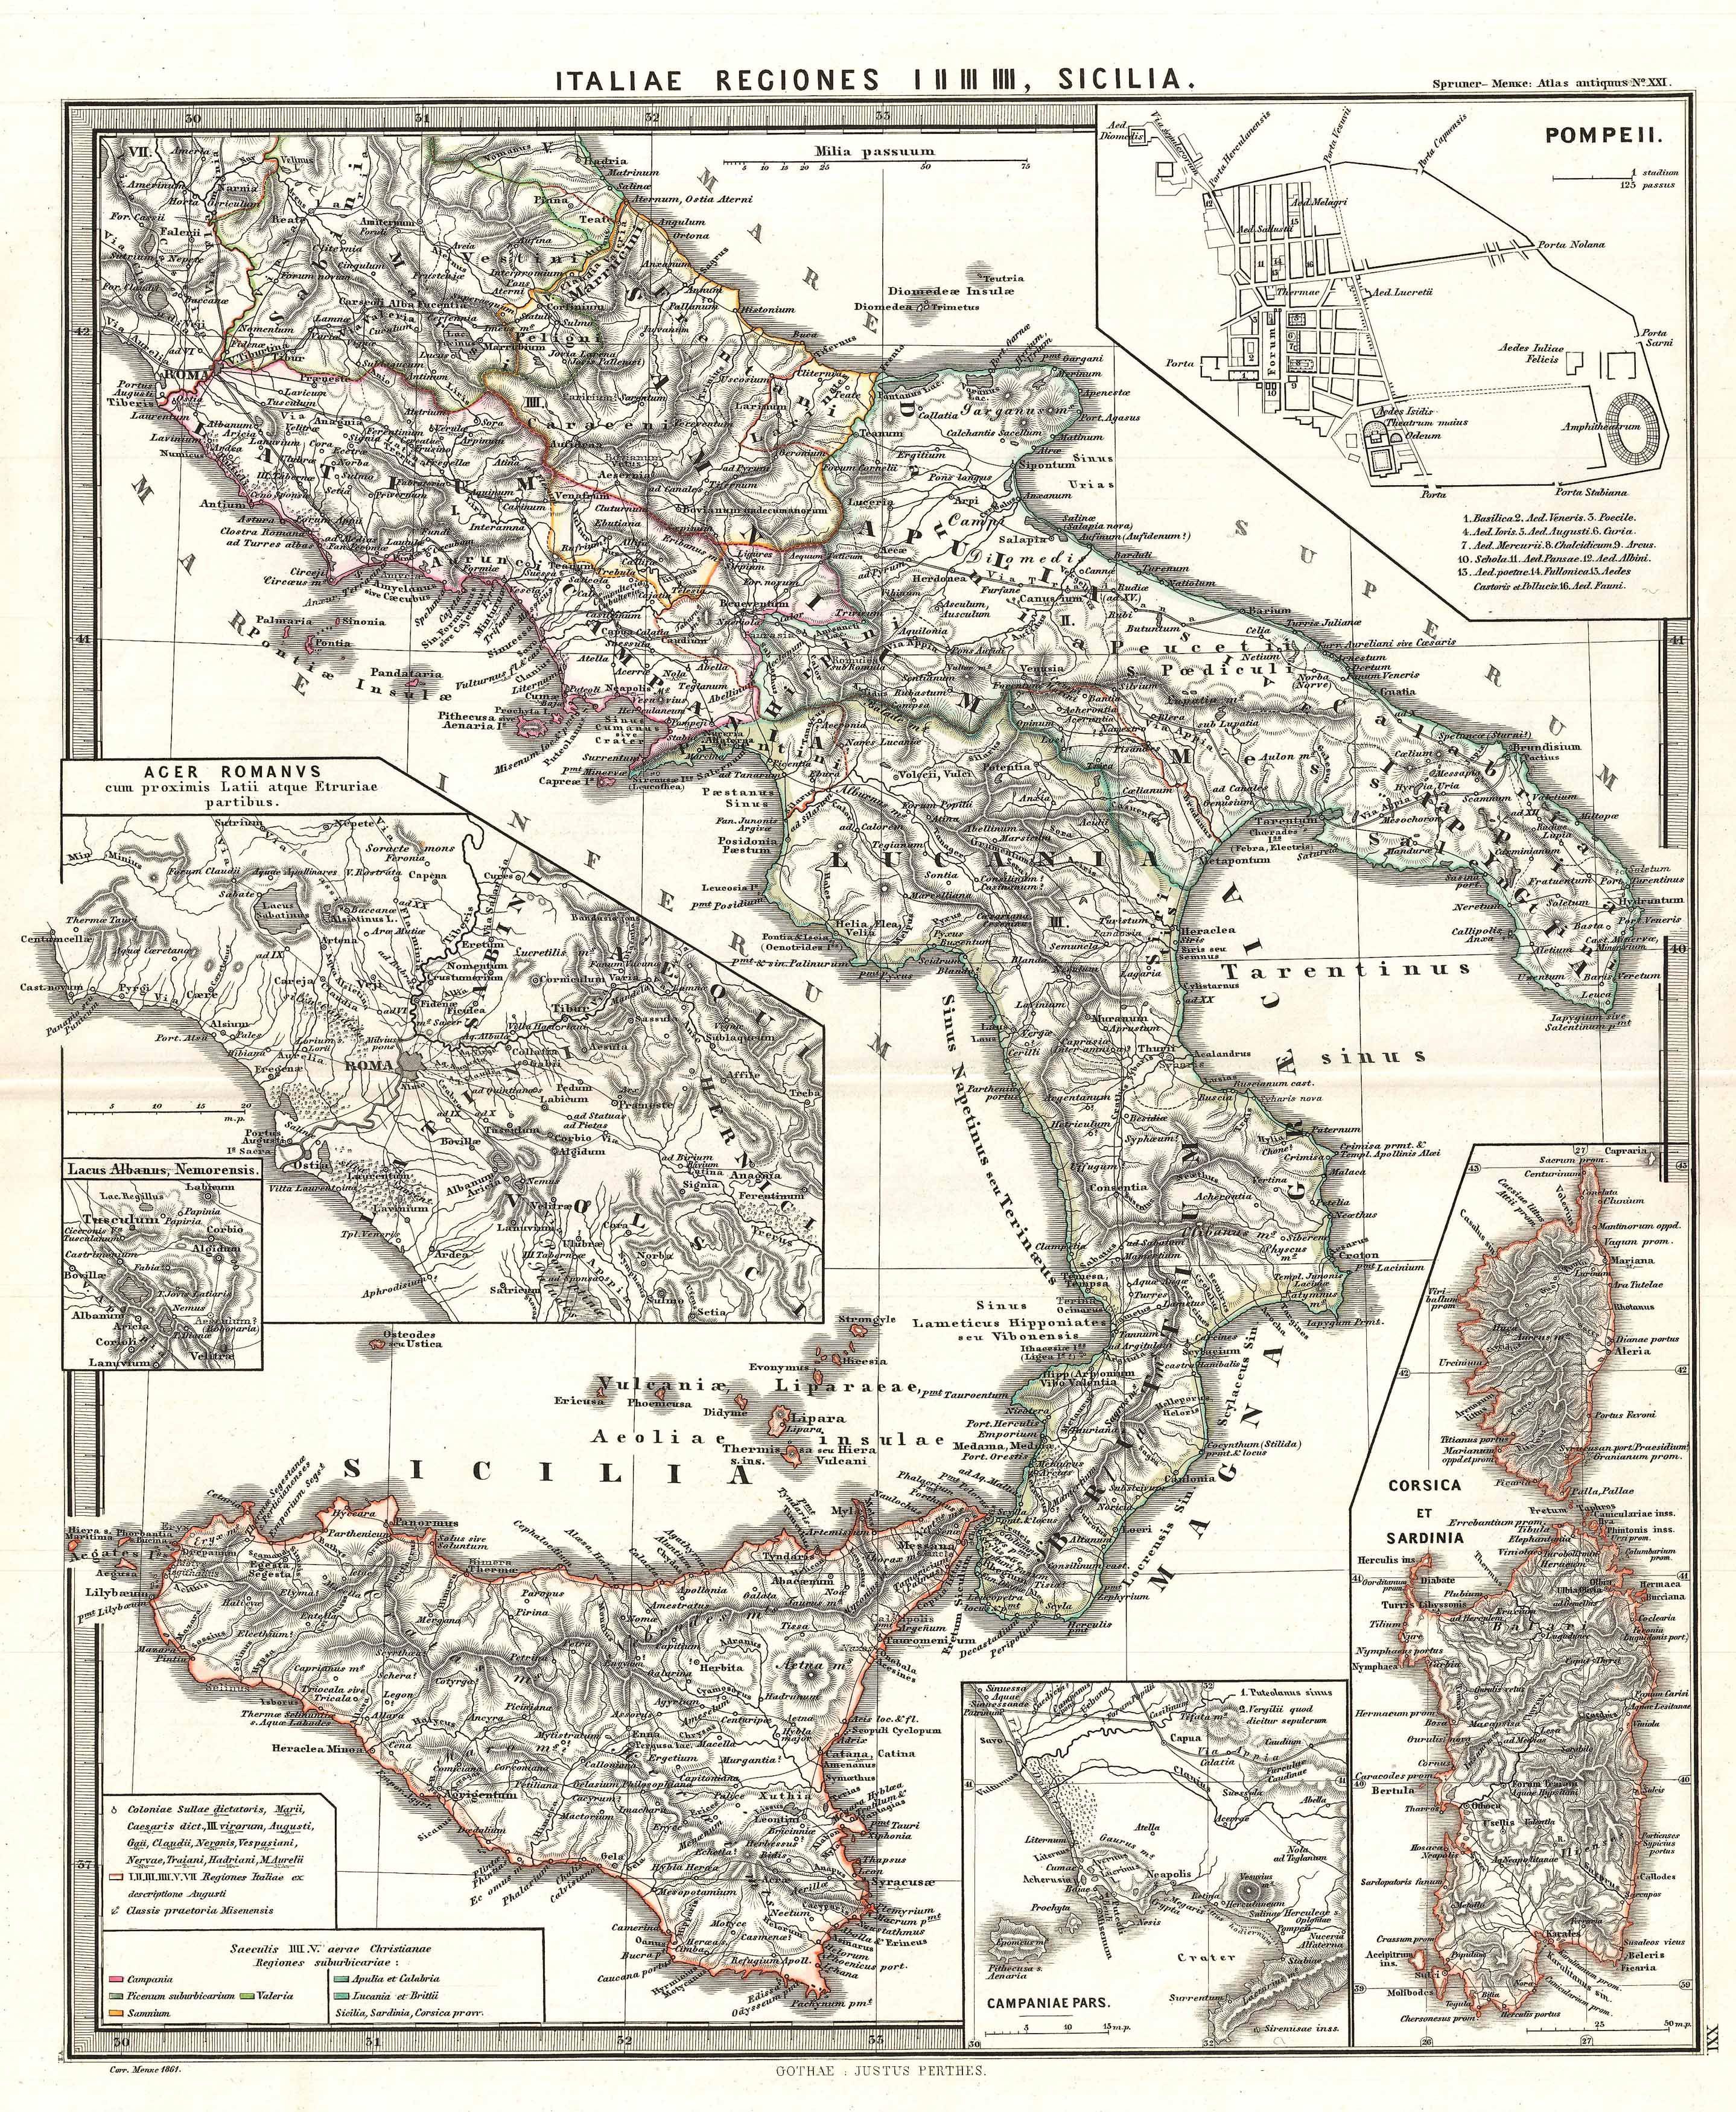 1865 Spruner Map of Southern Italy and Sicily - Geographicus - ItaliaeSicilia-spruner-1865